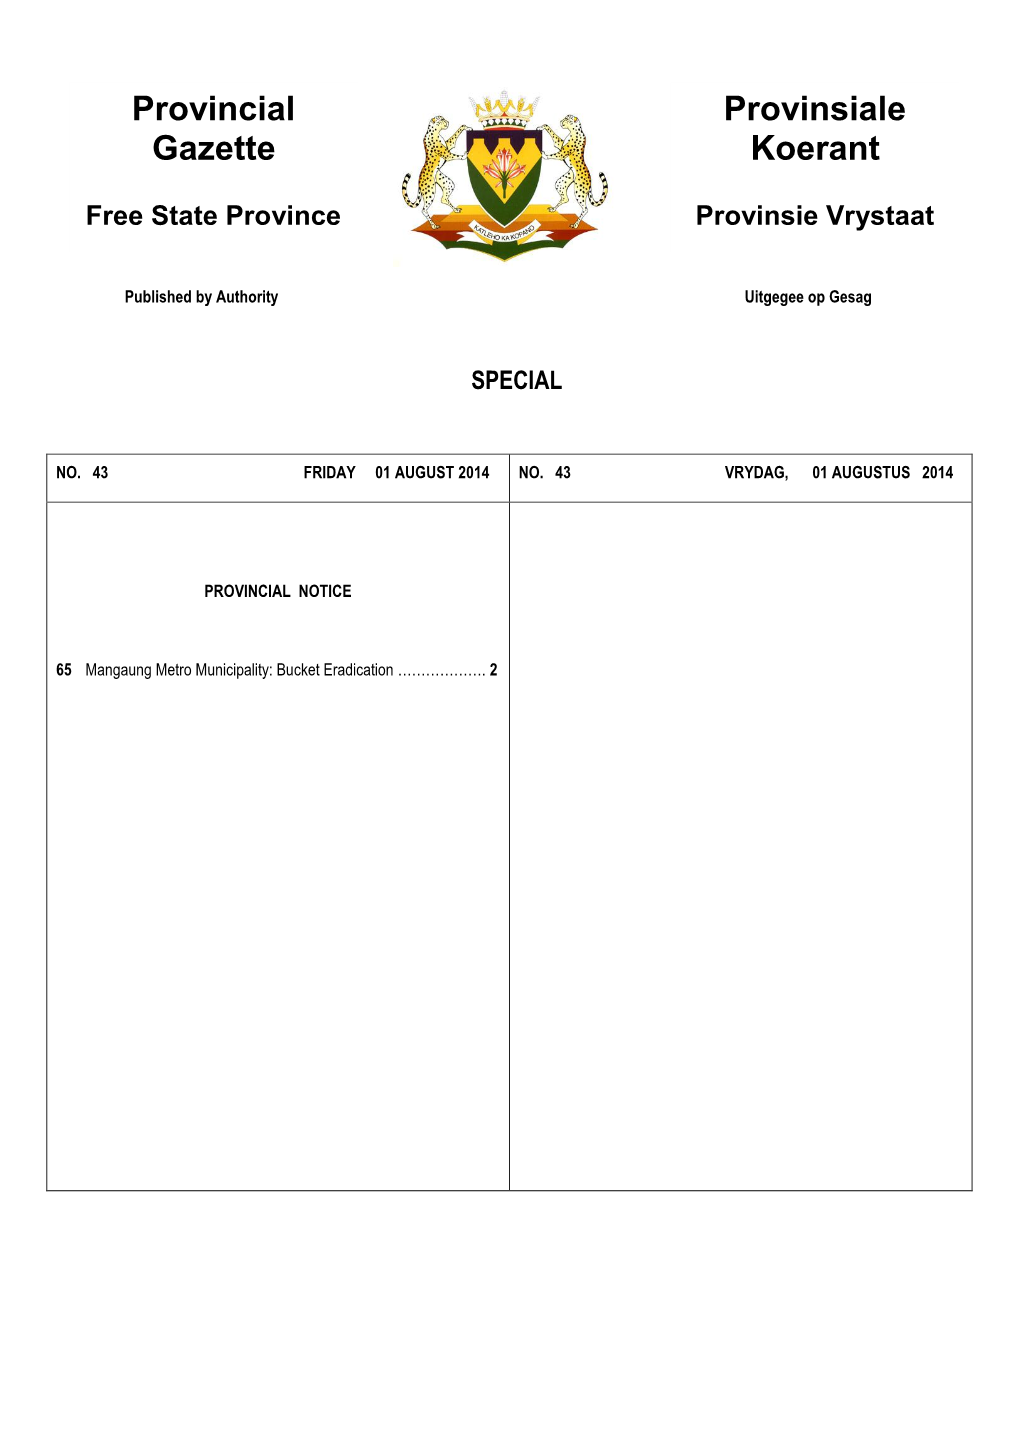 Provincial Gazette for Free State No 43 of 01-August-2014